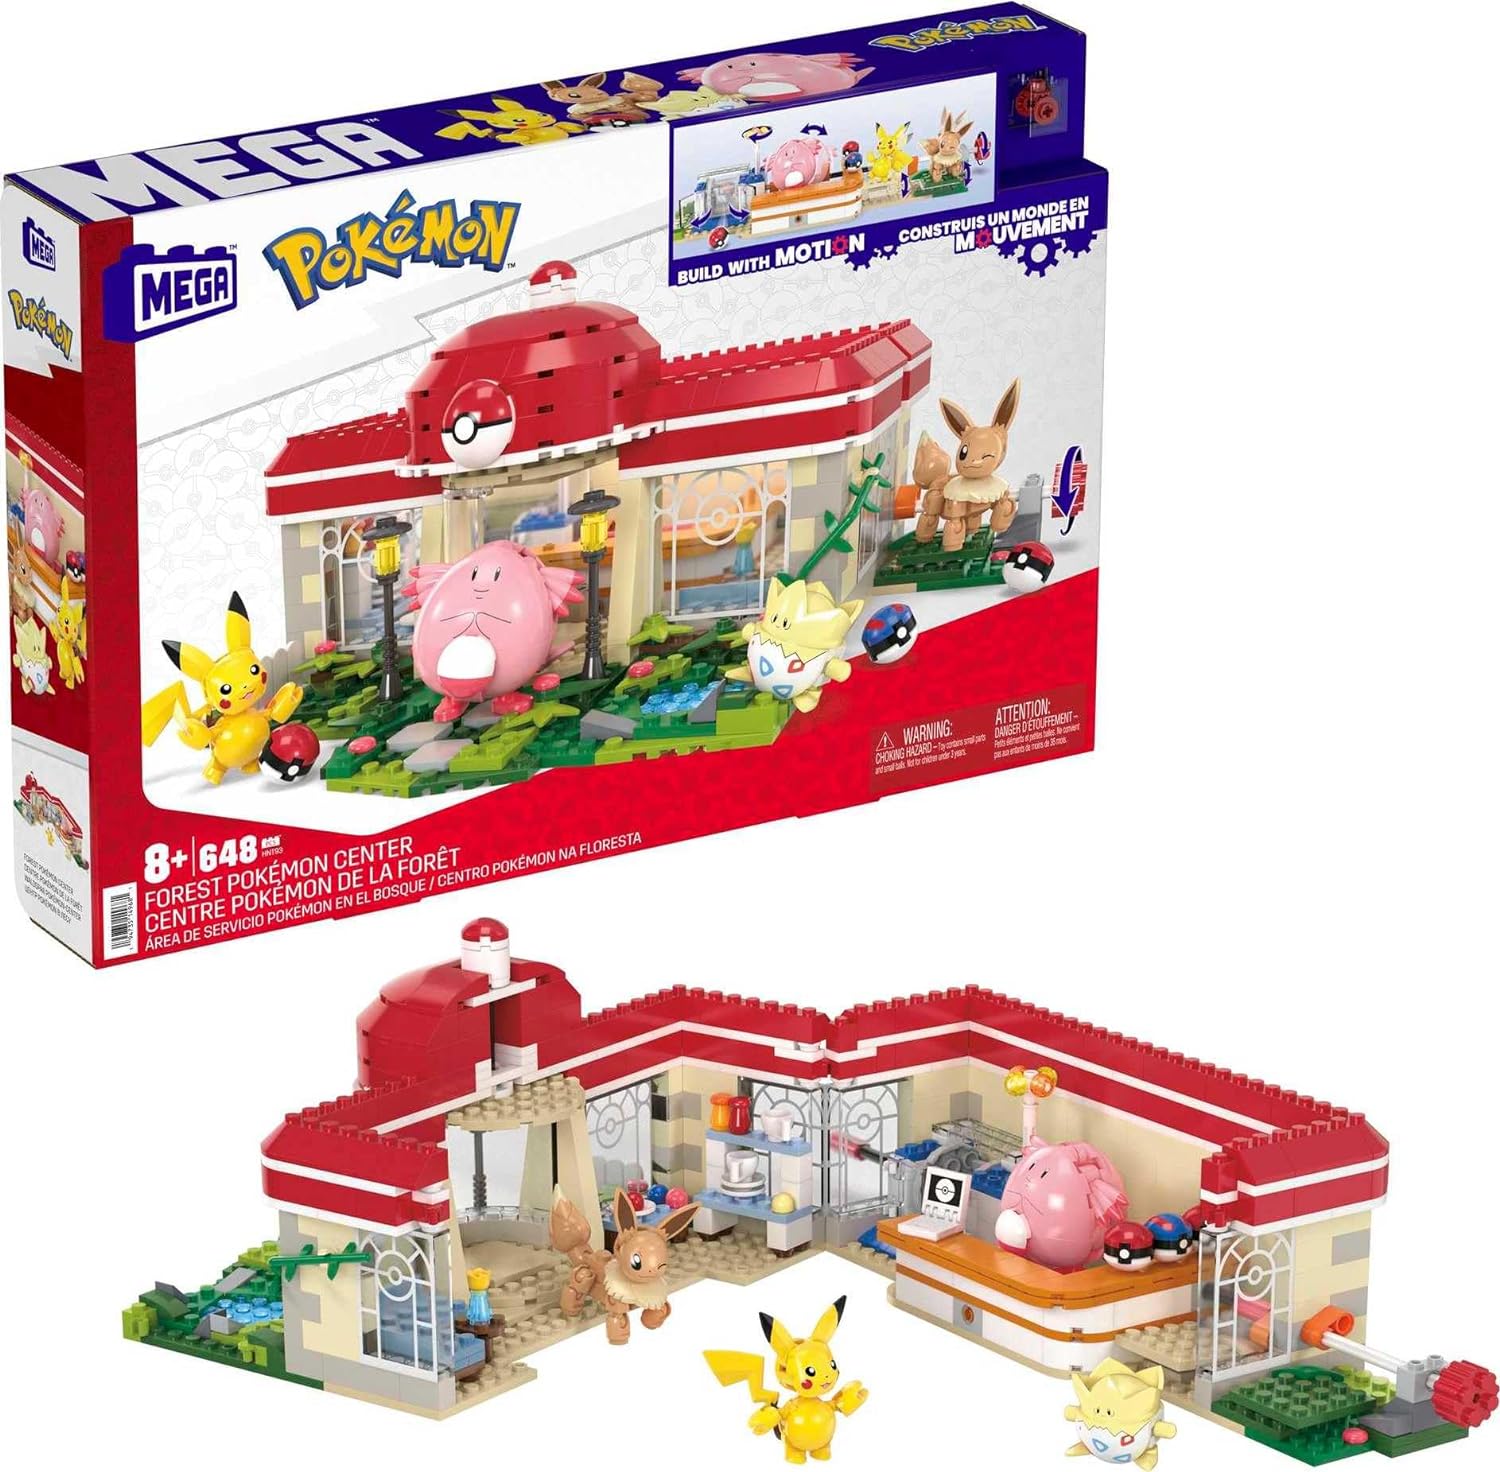 648-Pc Mega Construx Forest Pokémon Center Building Set w/ 4 Poseable Characters $20.99 + Free Shipping